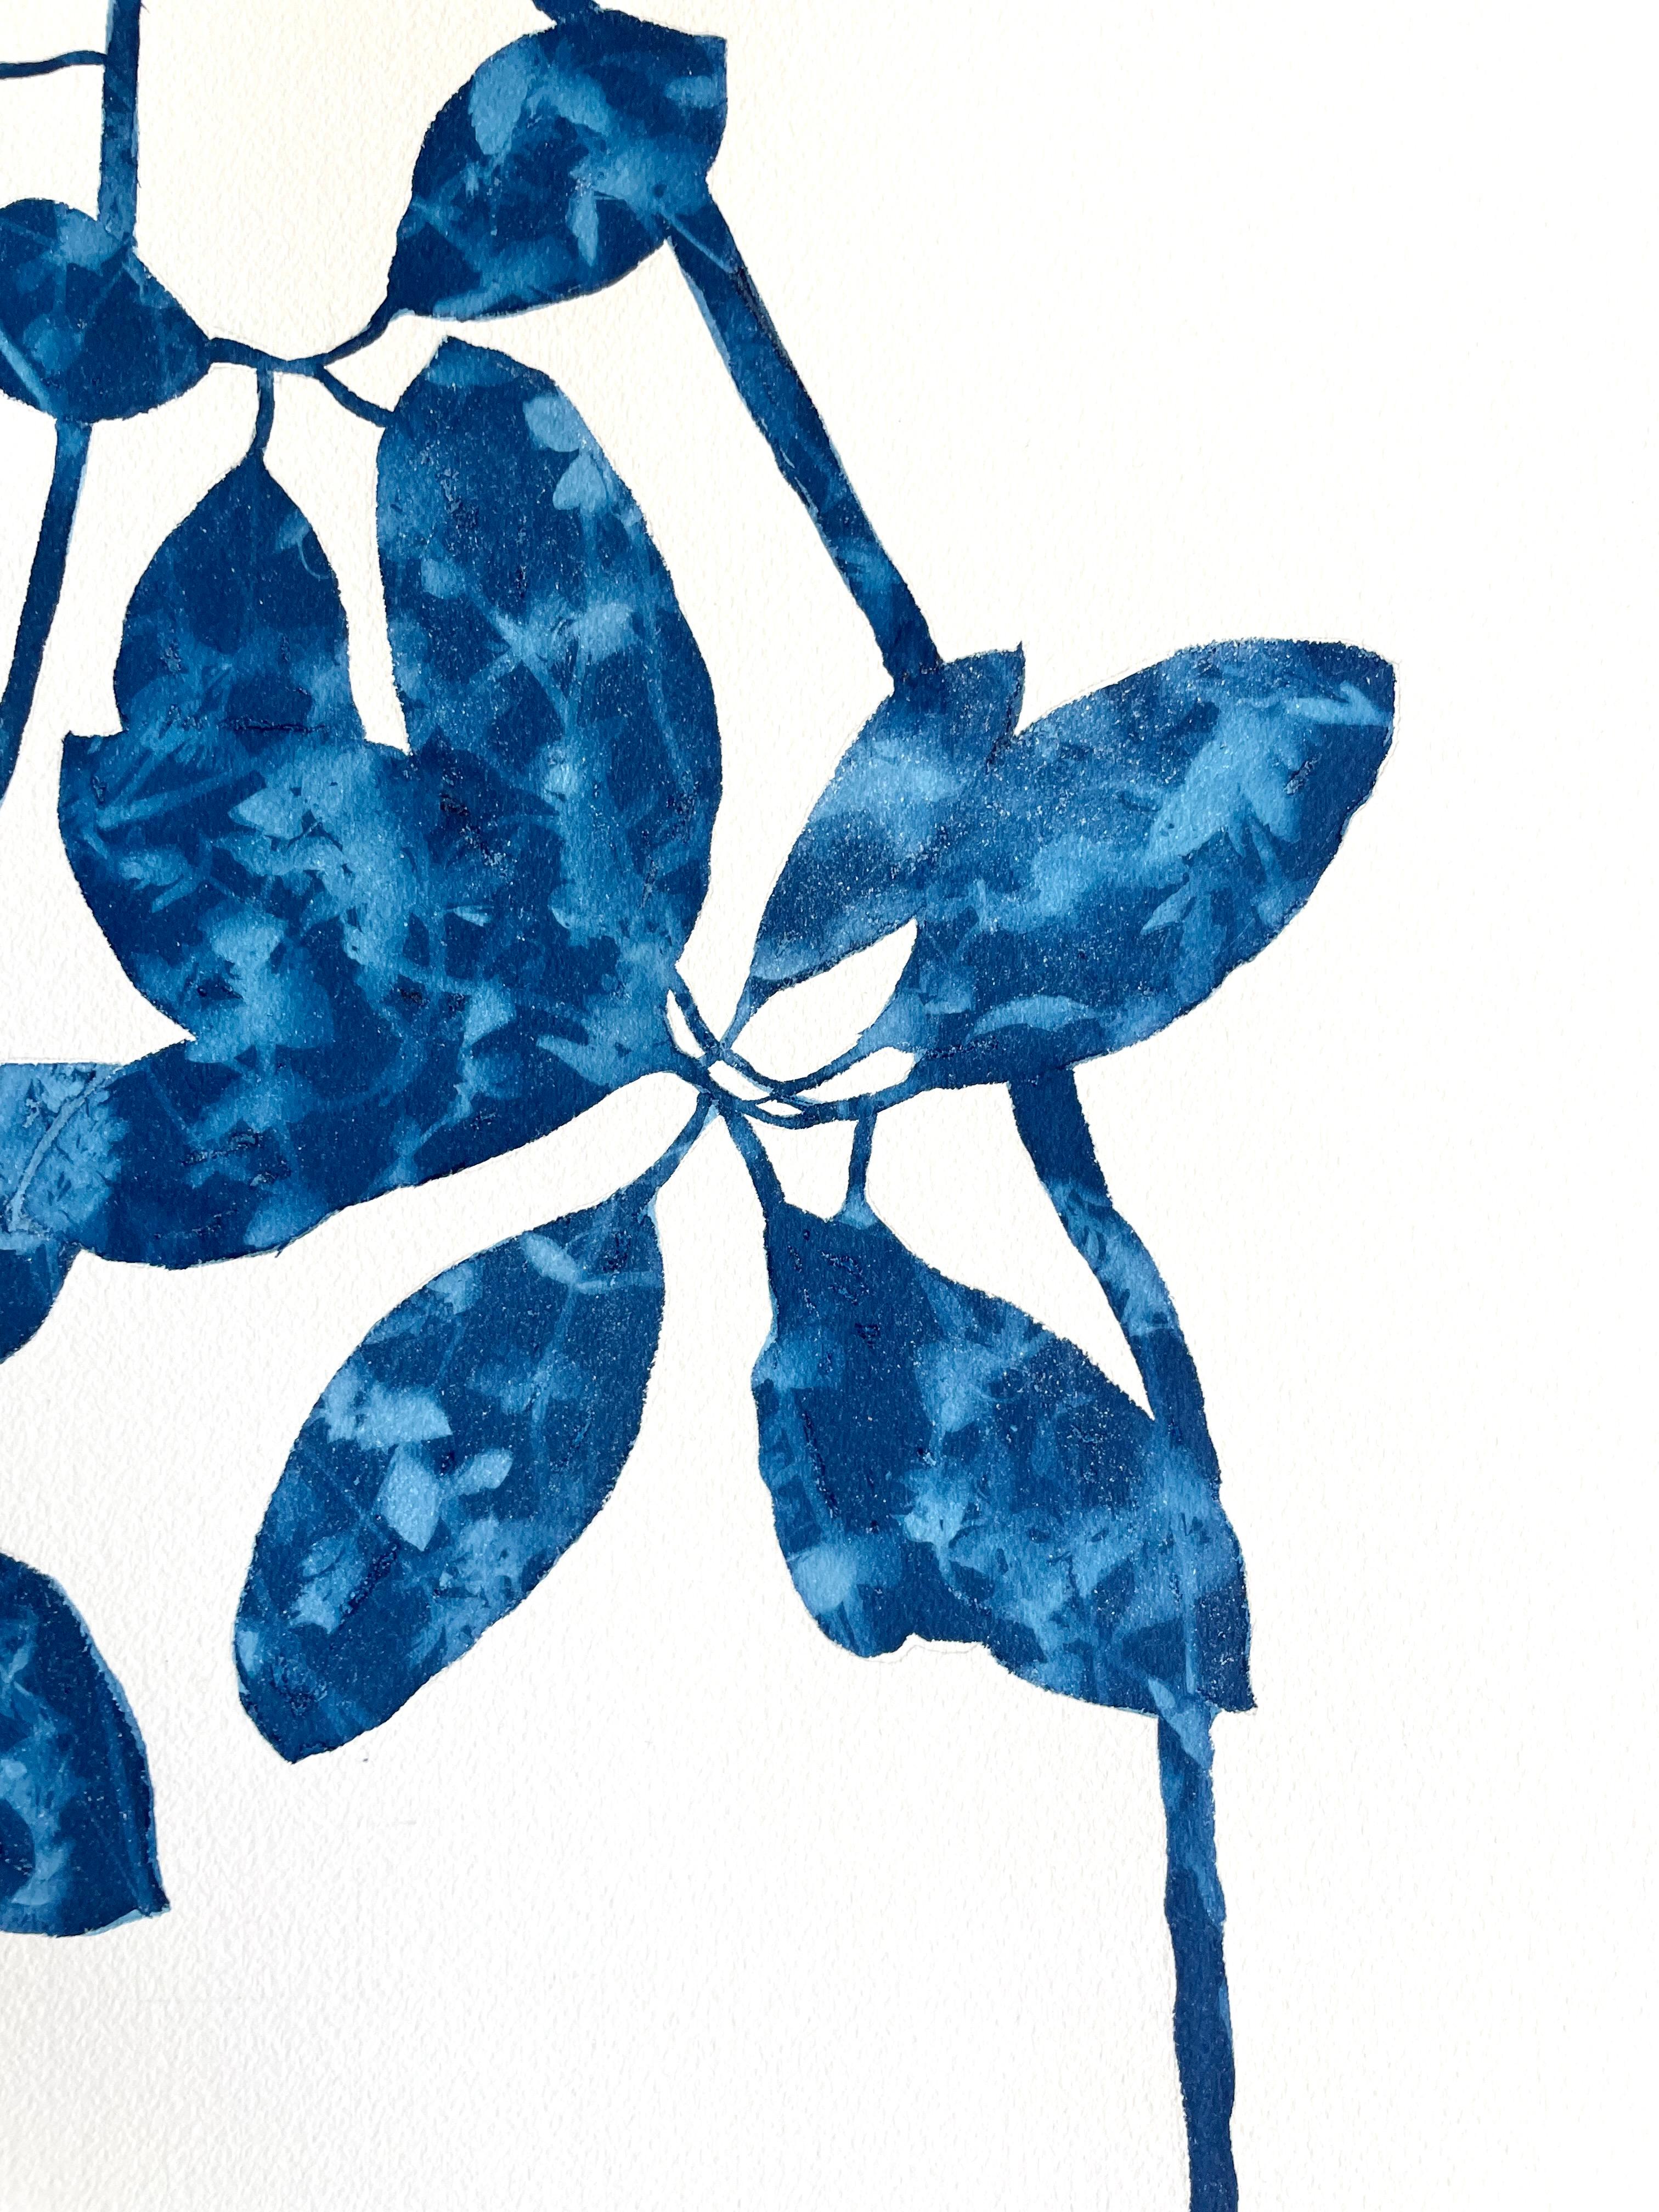 Delft Madrone II  (40 x 26 inch cyanotype painting) - Contemporary Print by Christine So